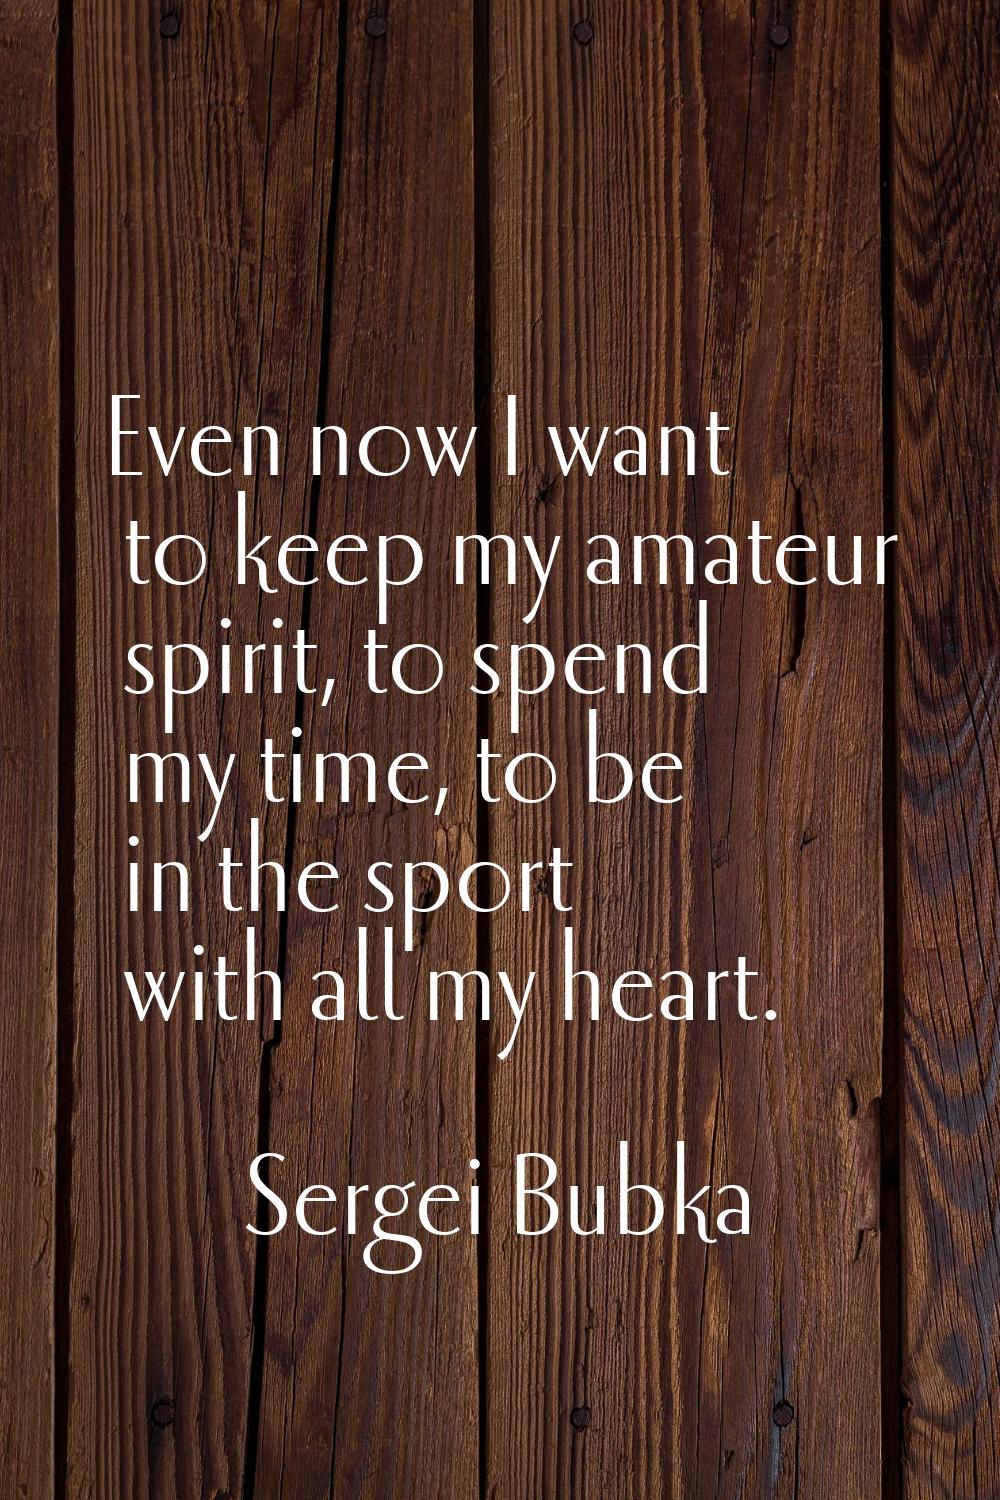 Even now I want to keep my amateur spirit, to spend my time, to be in the sport with all my heart.